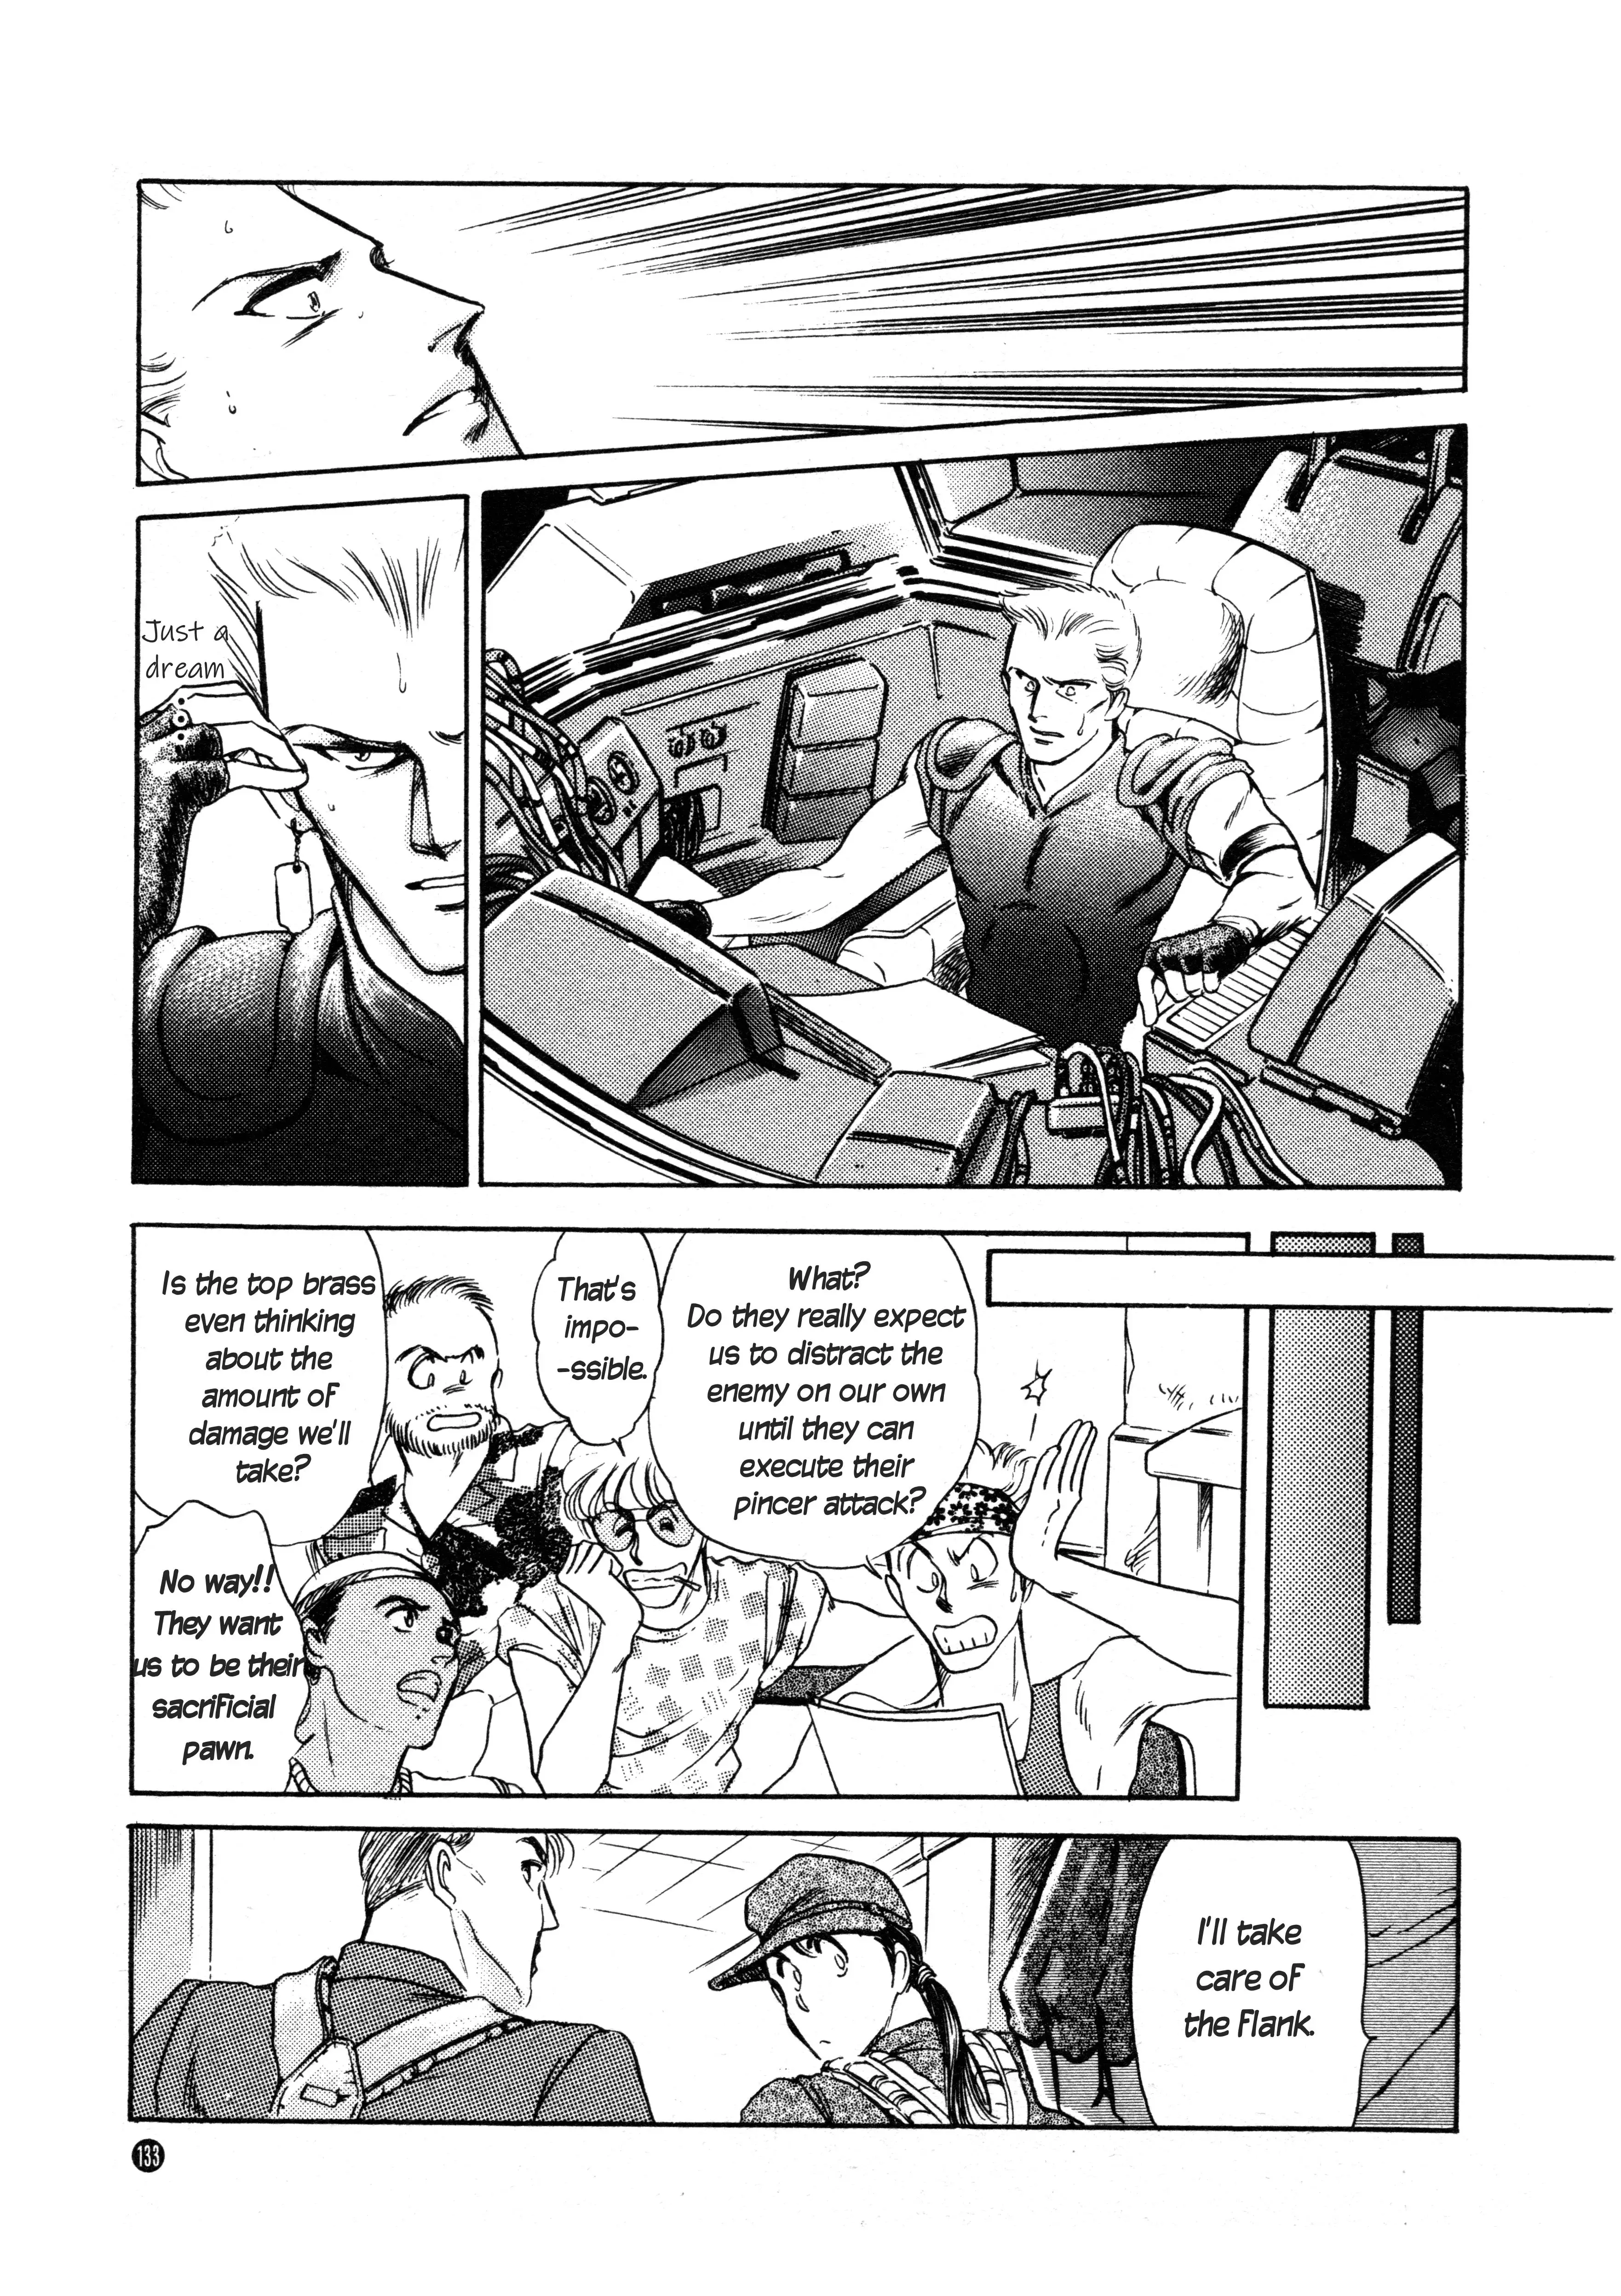 Front Mission - 6 page 5-0b8cee06